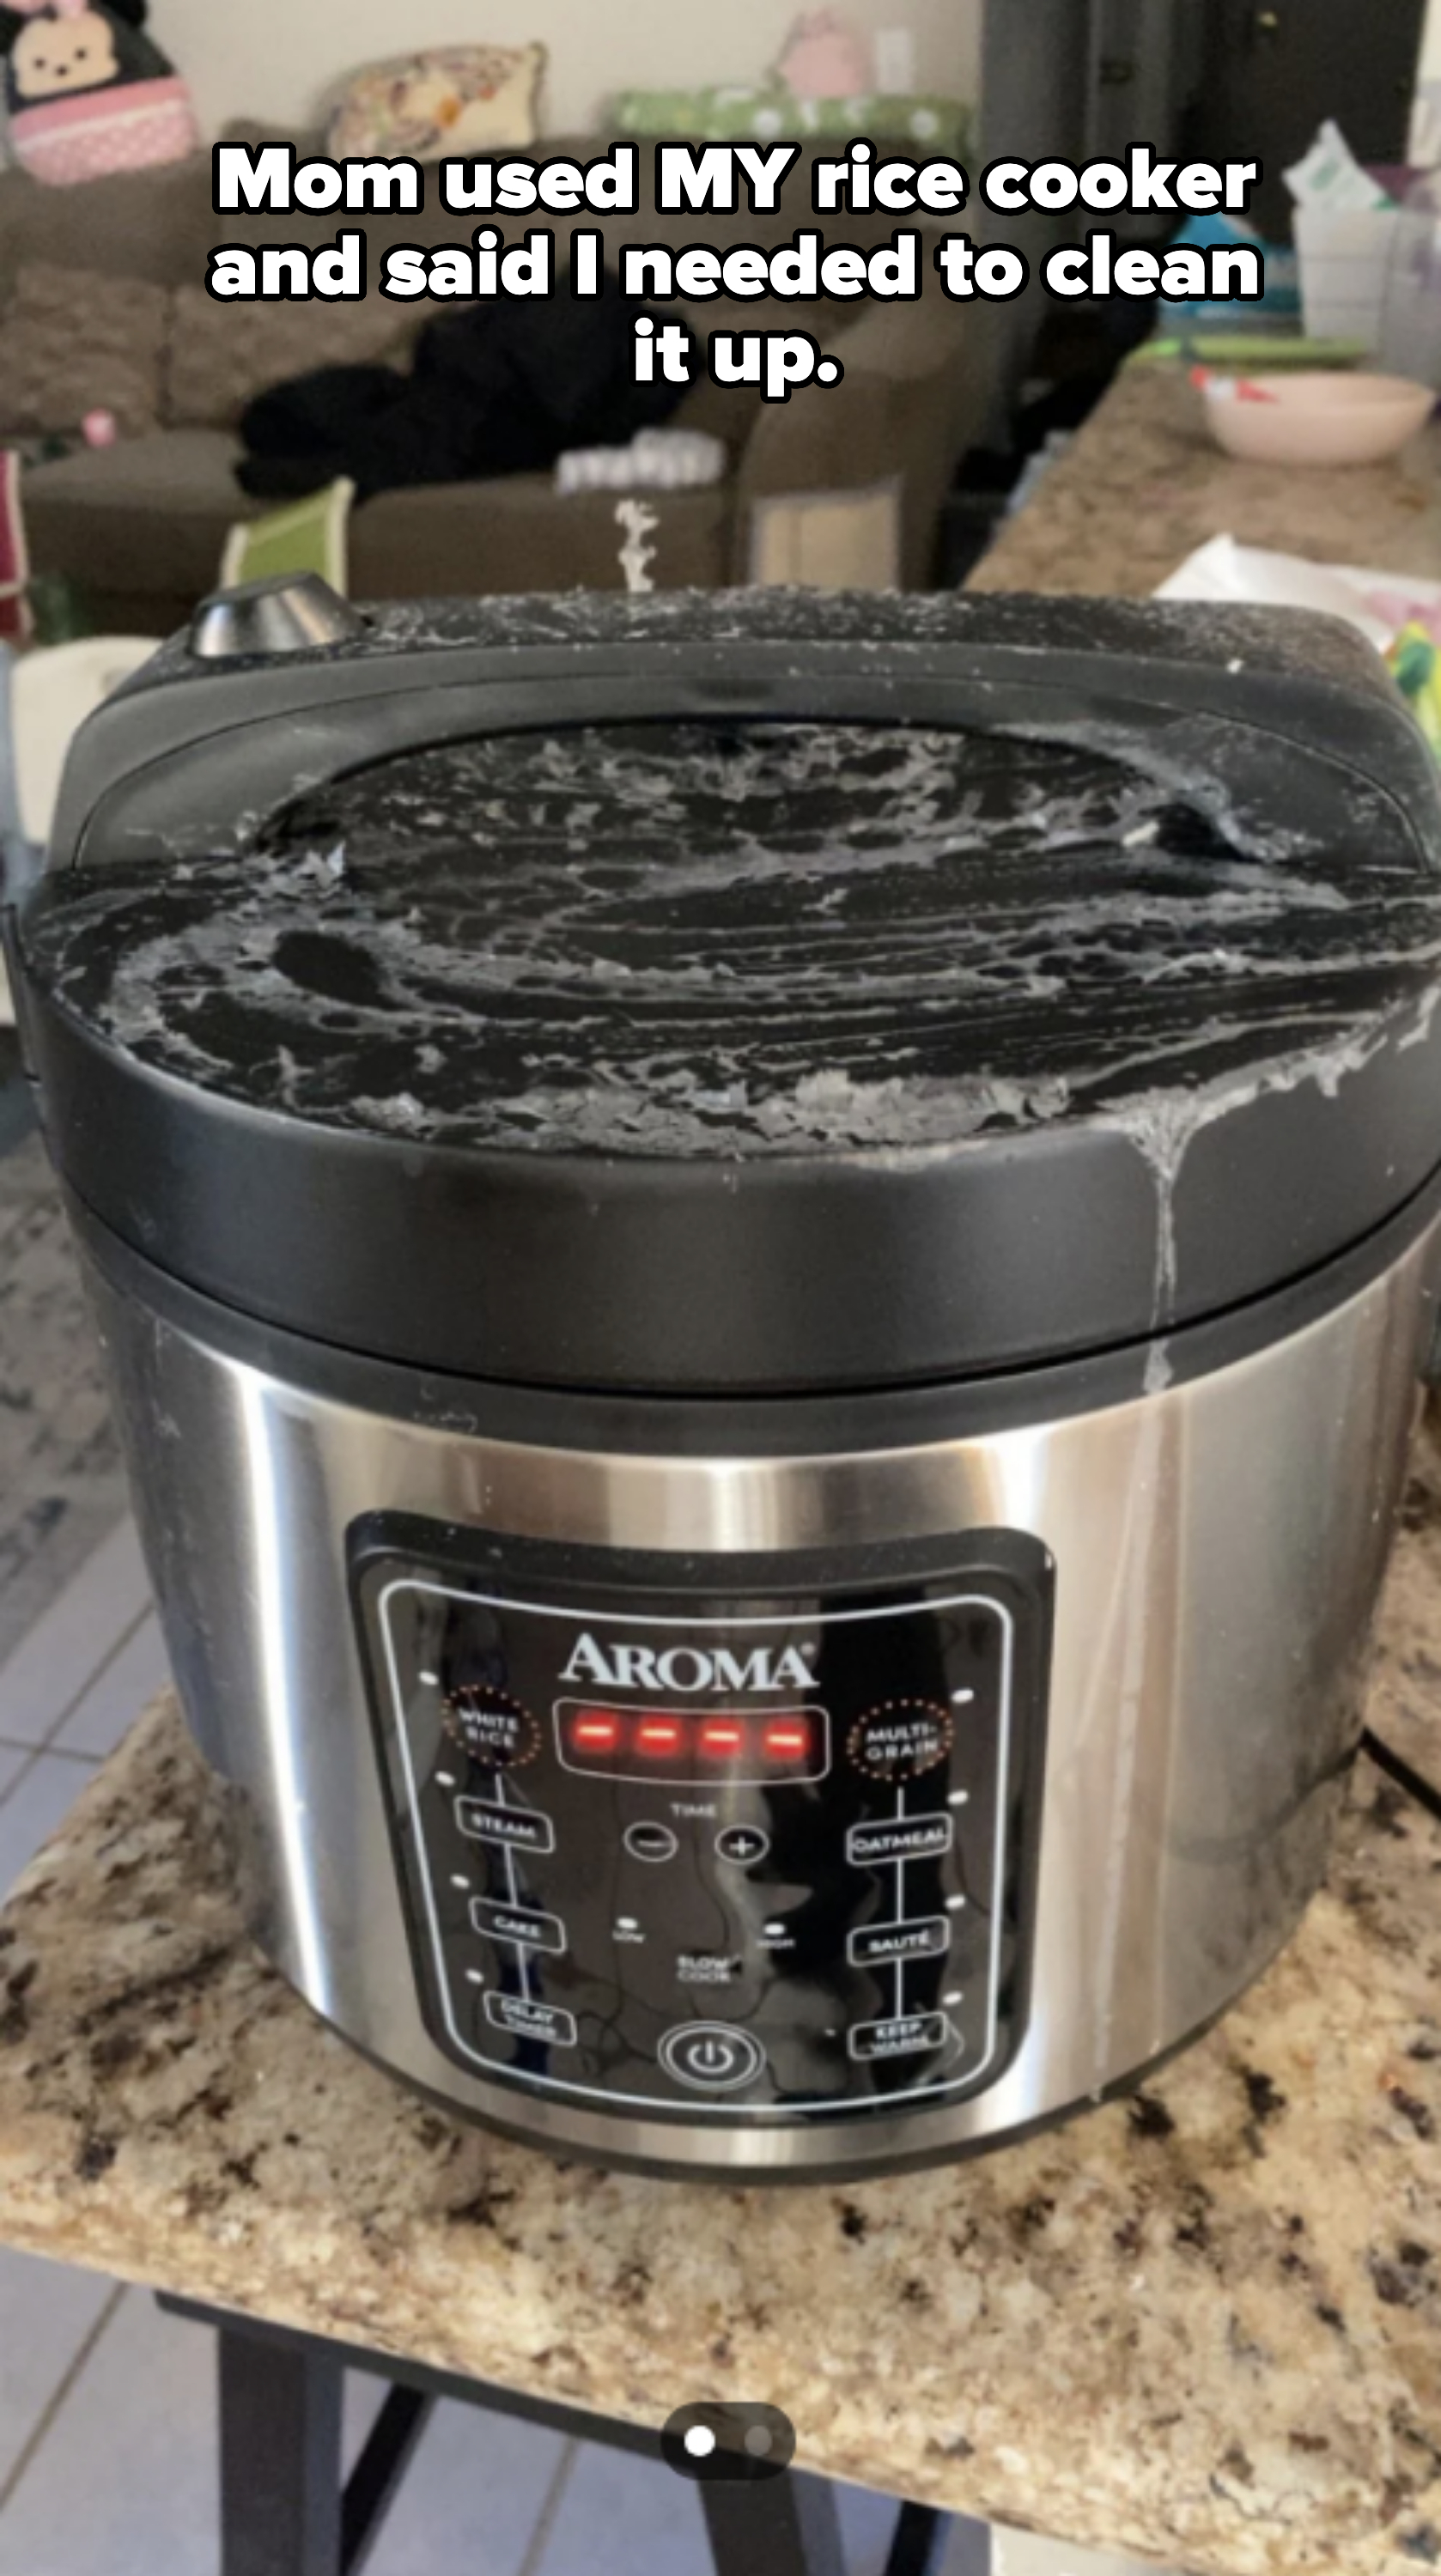 A dirty rice cooker saying OP&#x27;s mom got it dirty and said OP needs to clean it